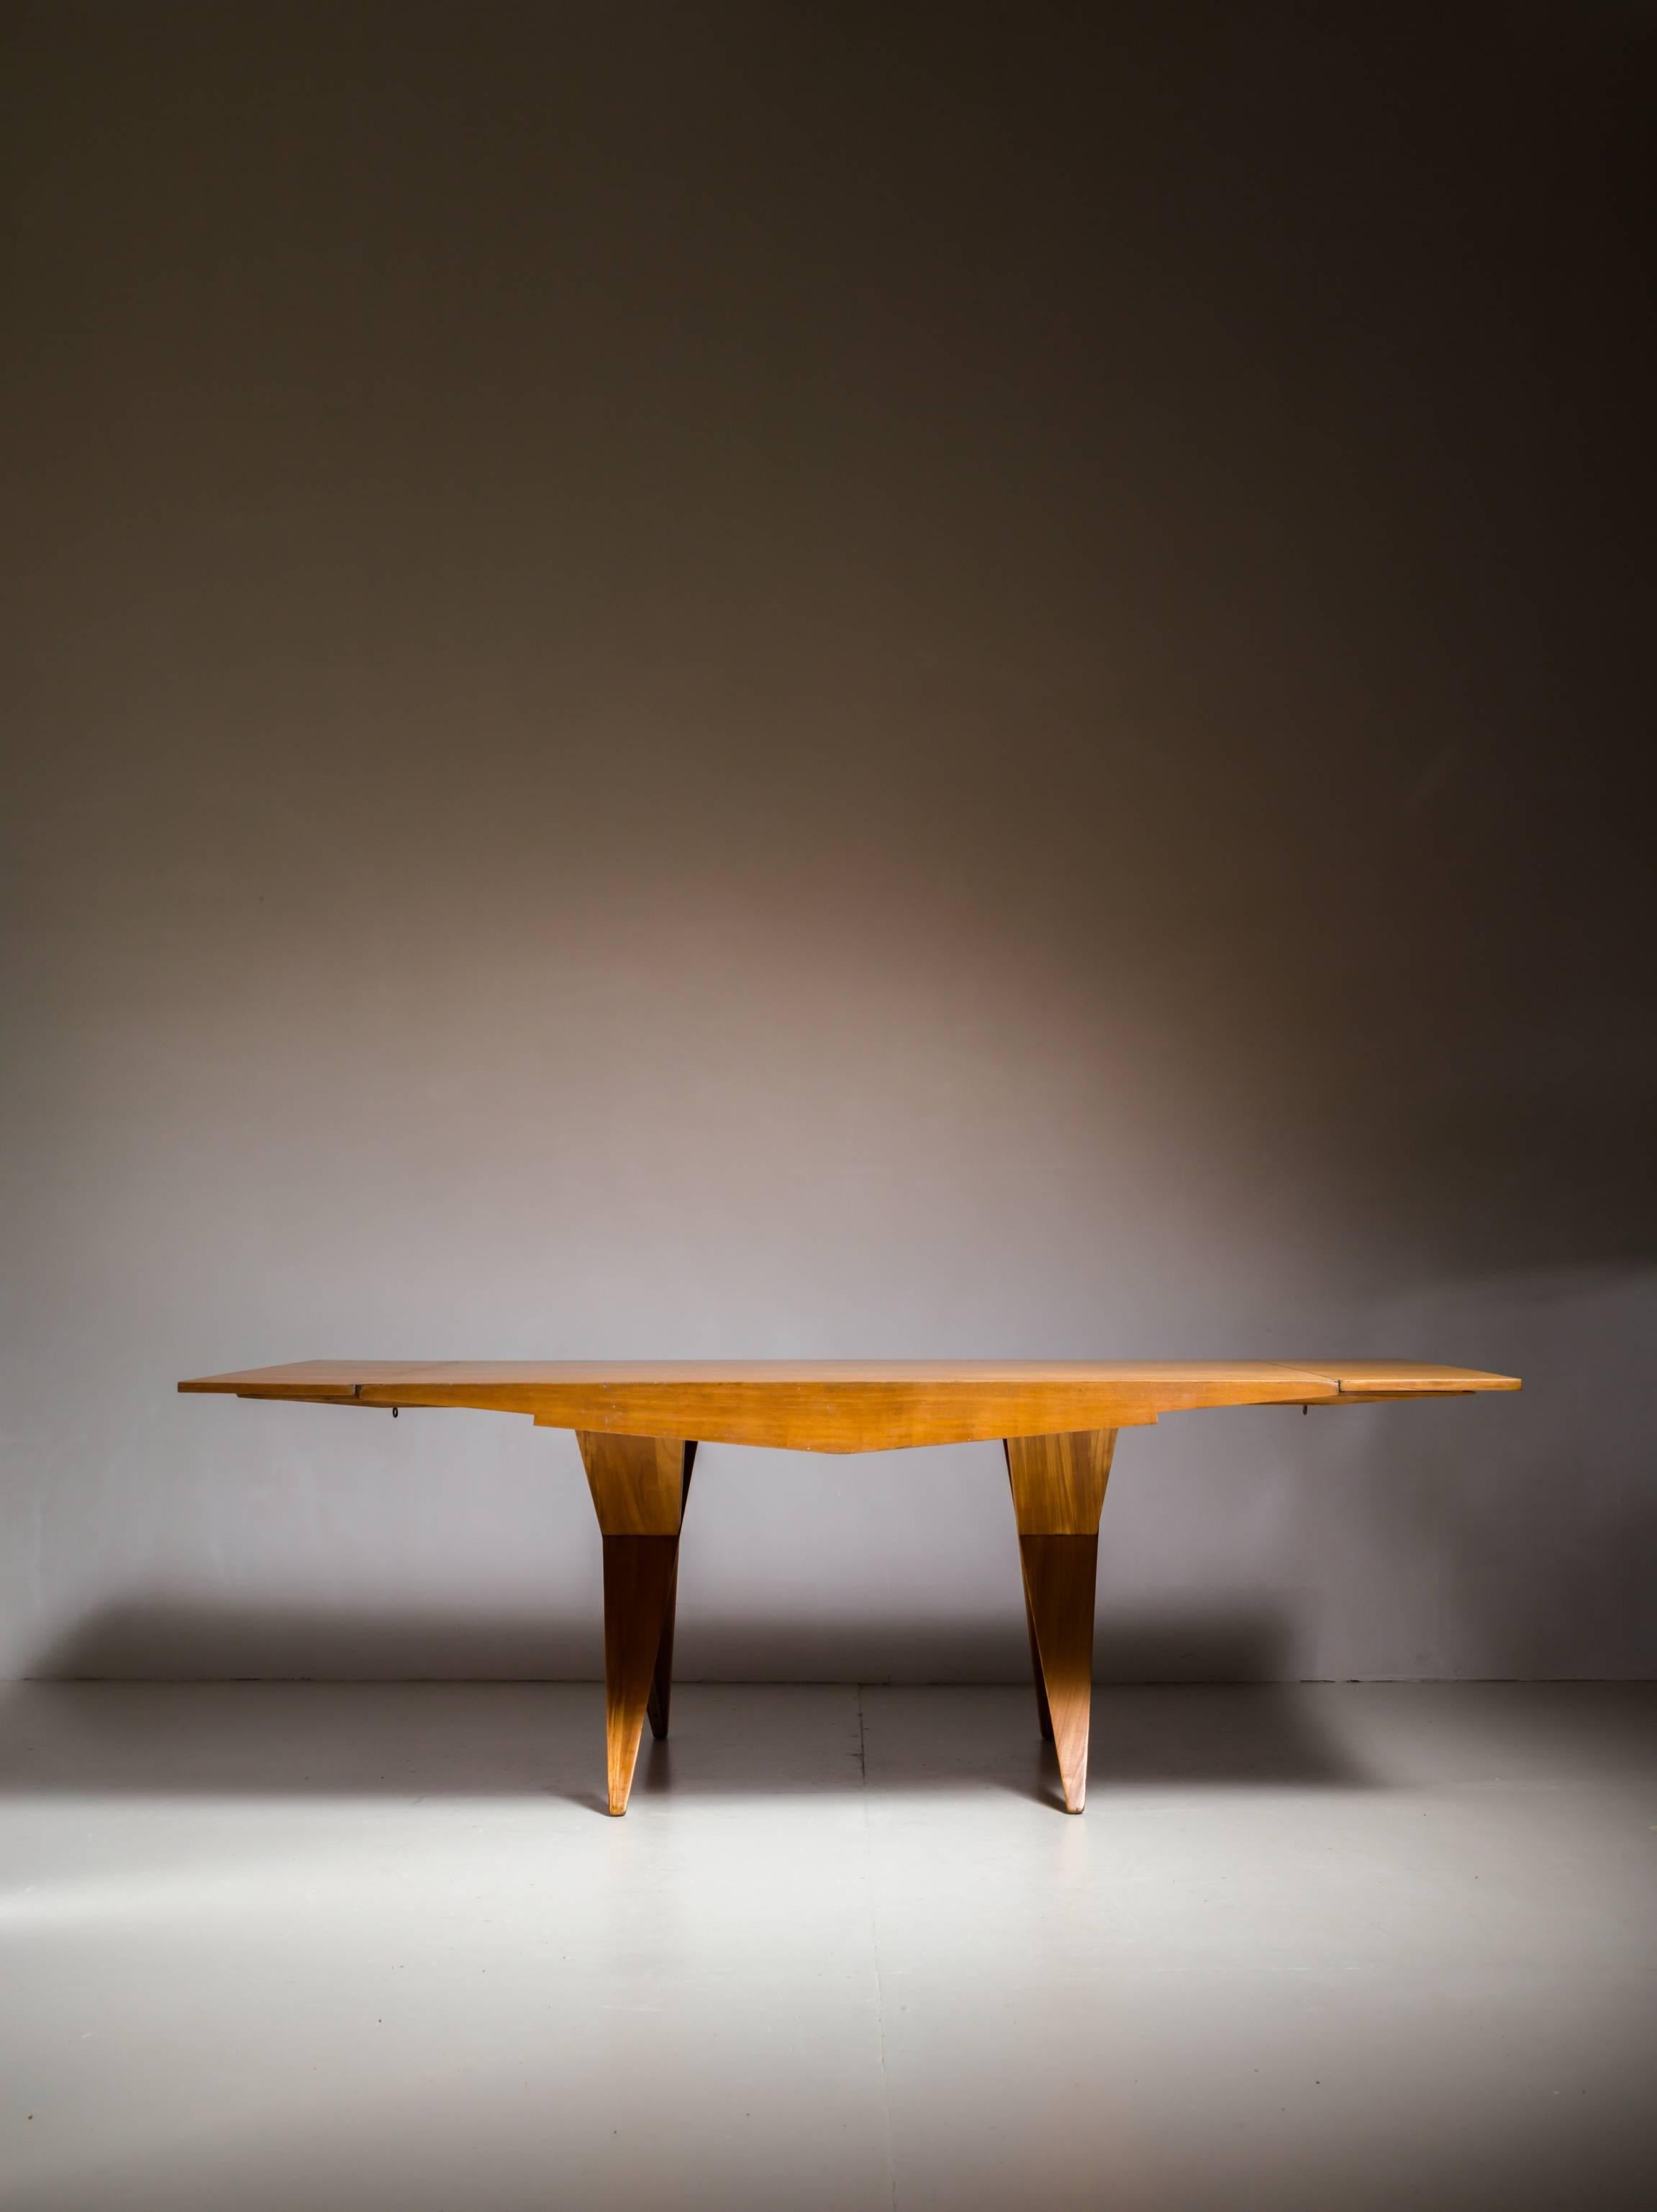 Dan Johnson Architectural and Extendable Dining Table, American, 1947 In Excellent Condition For Sale In Maastricht, NL